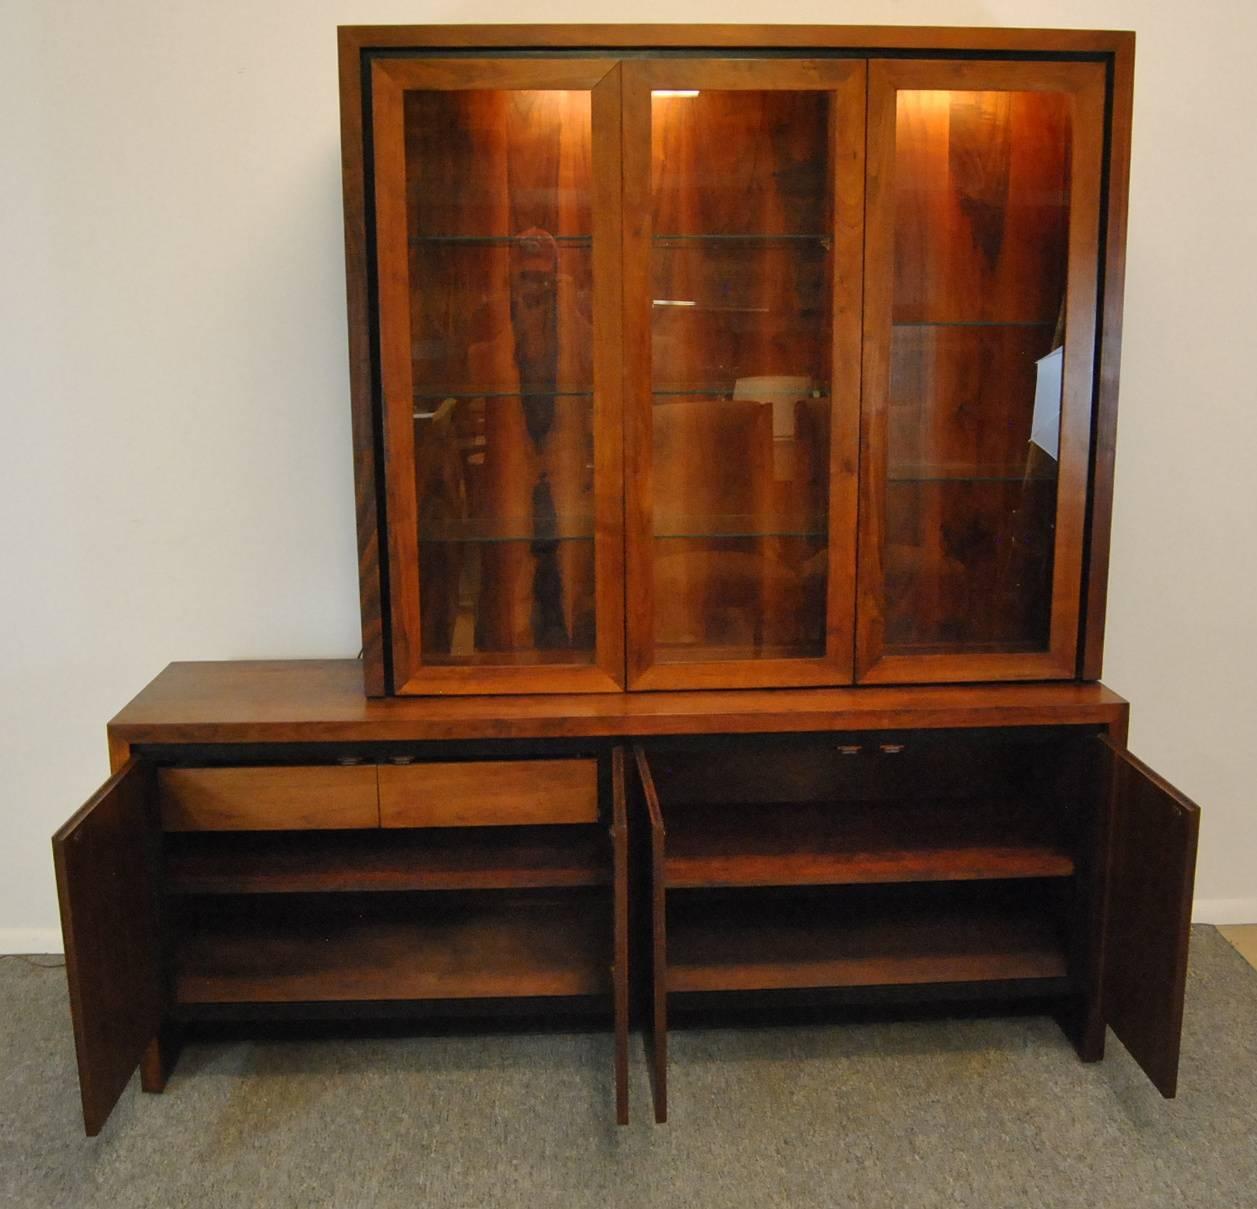 A beautiful Mid-Century Danish modern teak two-piece display cabinet by Dillingham. The top portion of this cabinet has an interior light and three glass doors. The two doors on the left open to three adjustable glass shelves, the door to the right